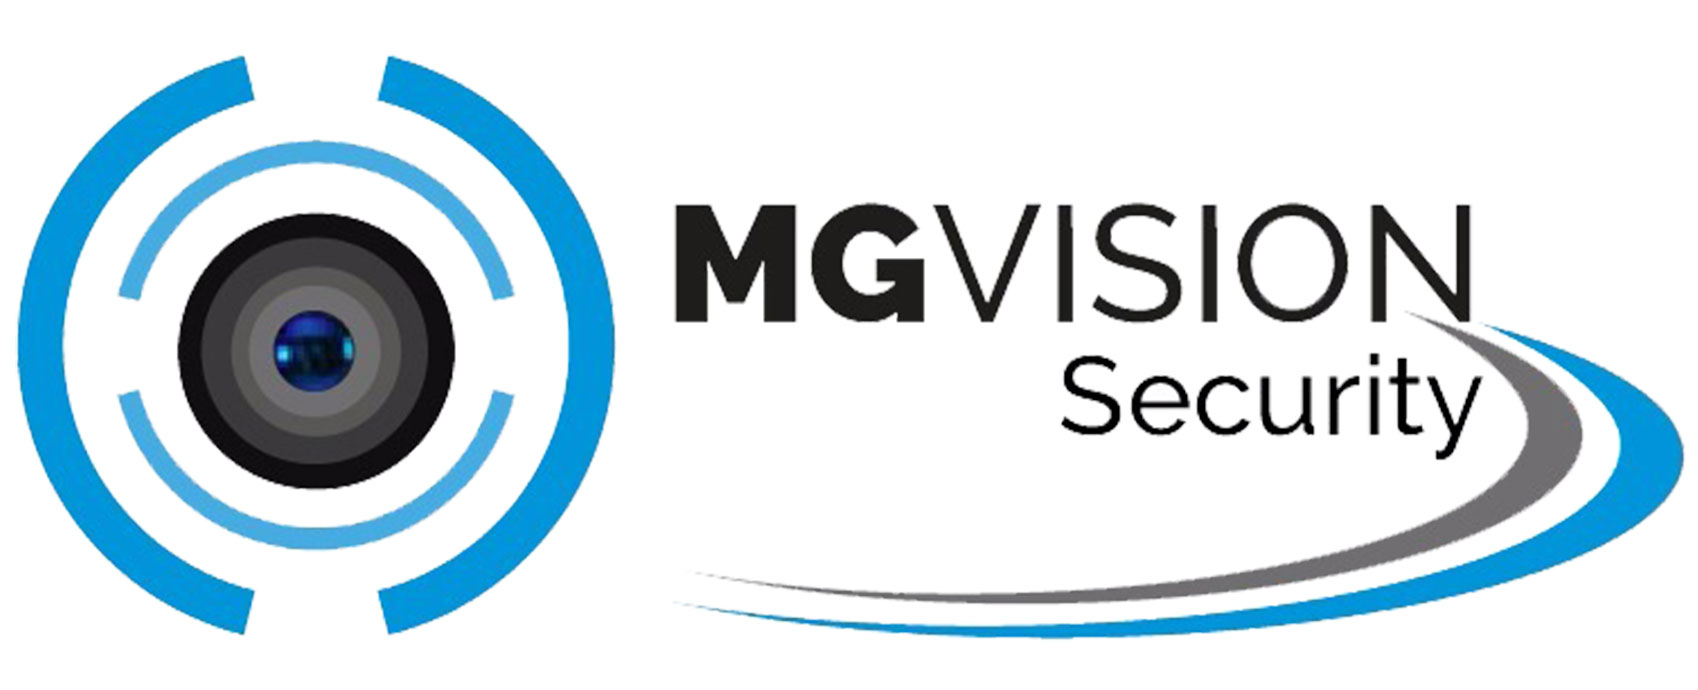 mgvission_difference_image3